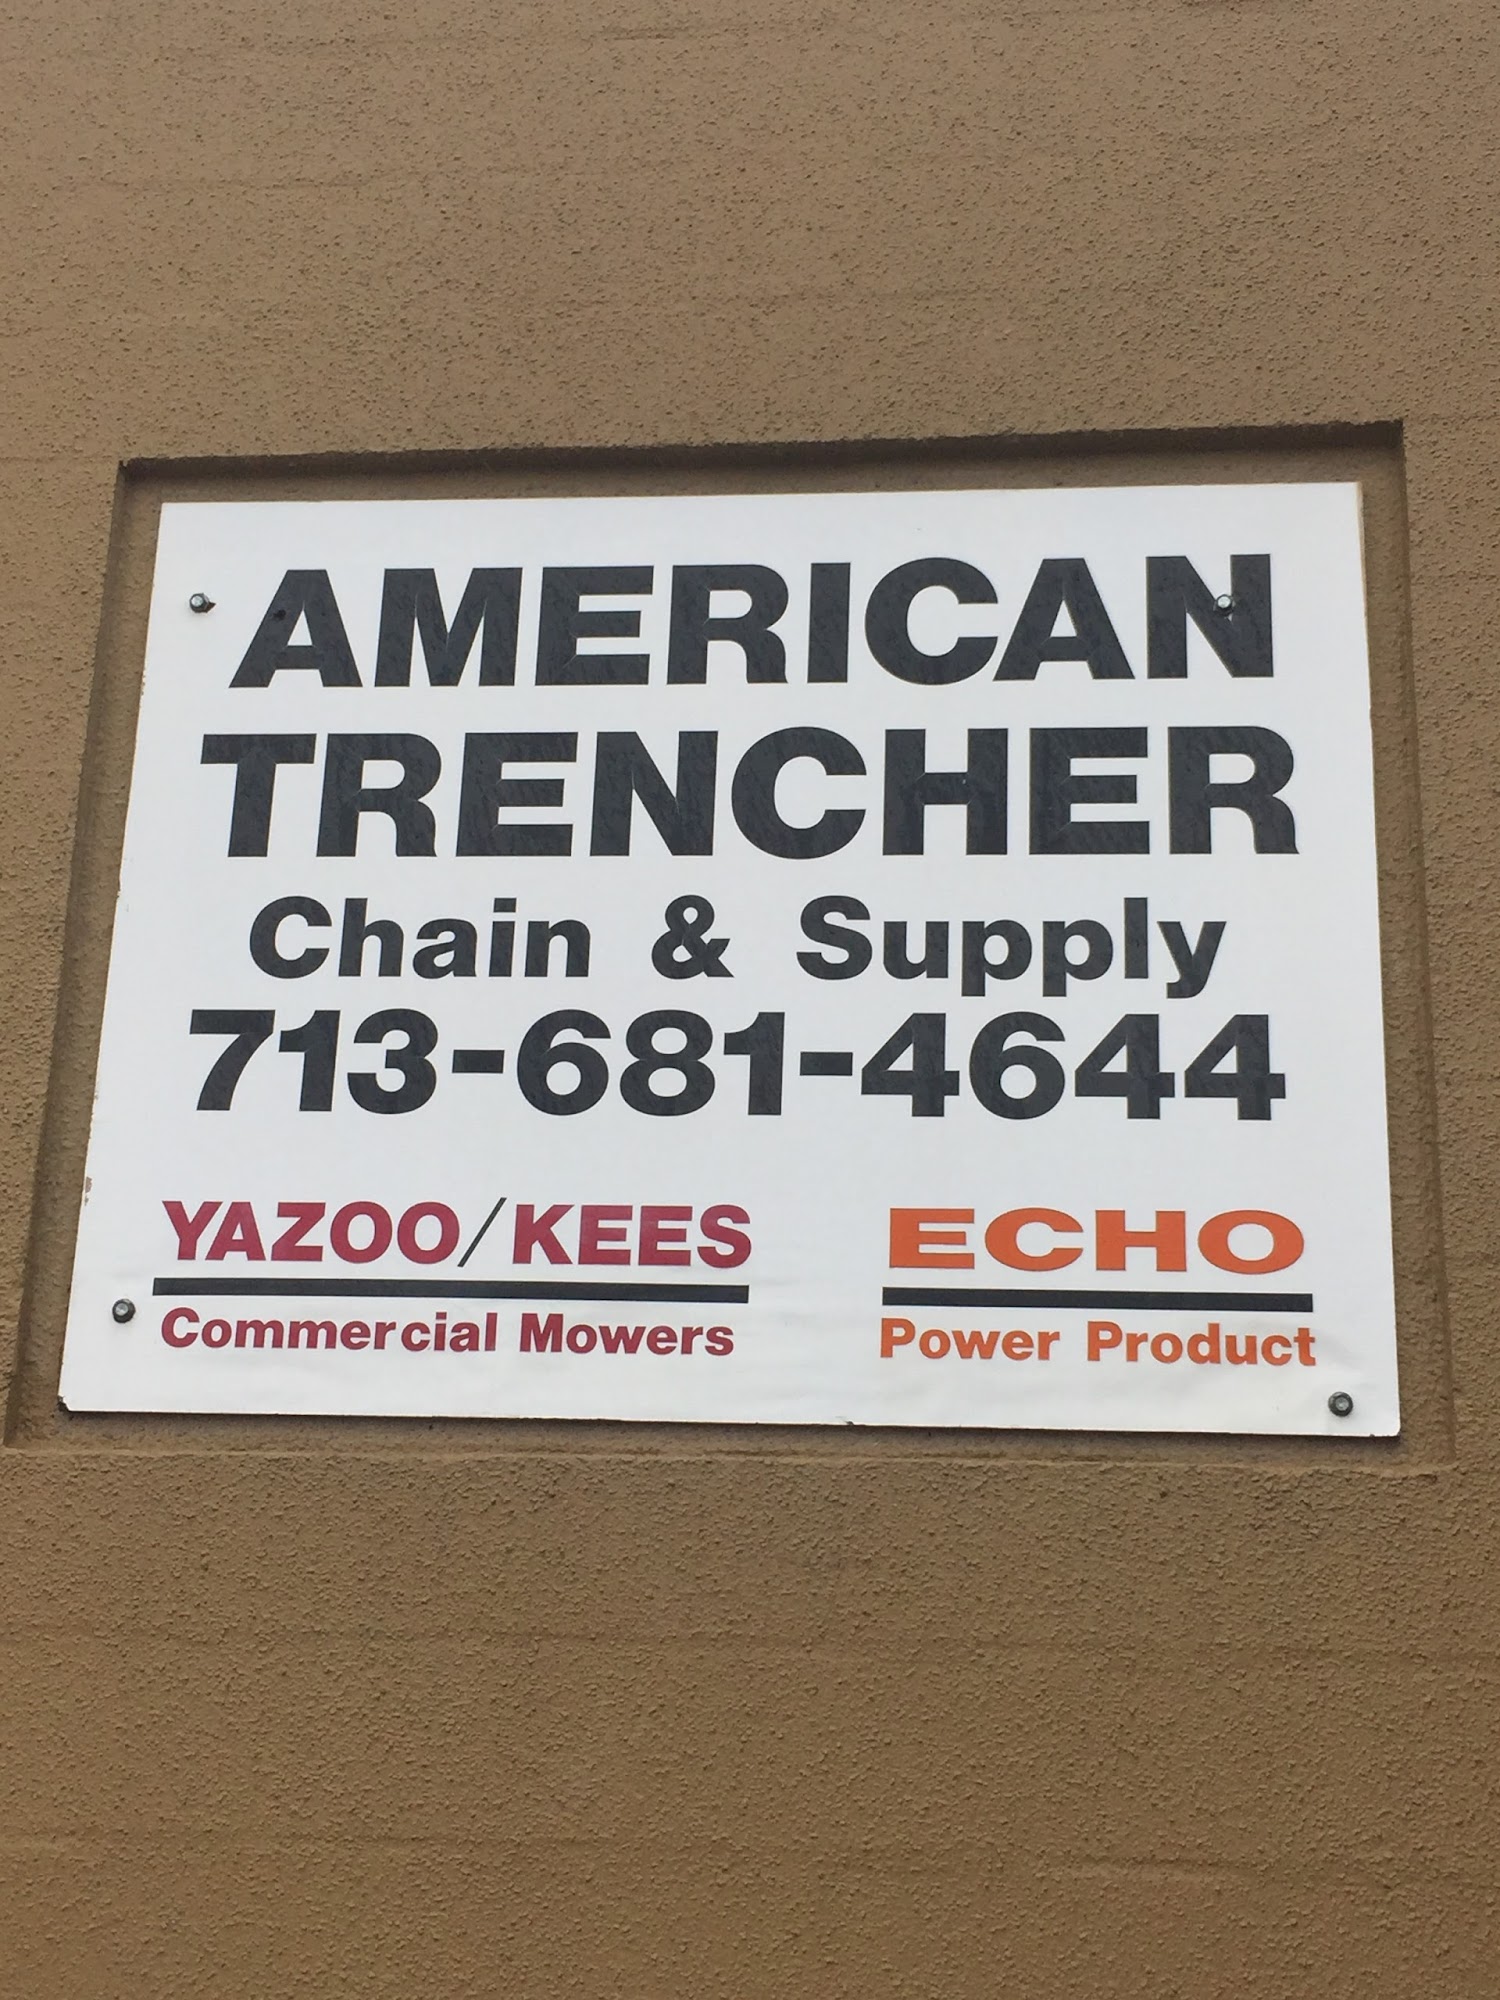 American Trencher Chain & Supply